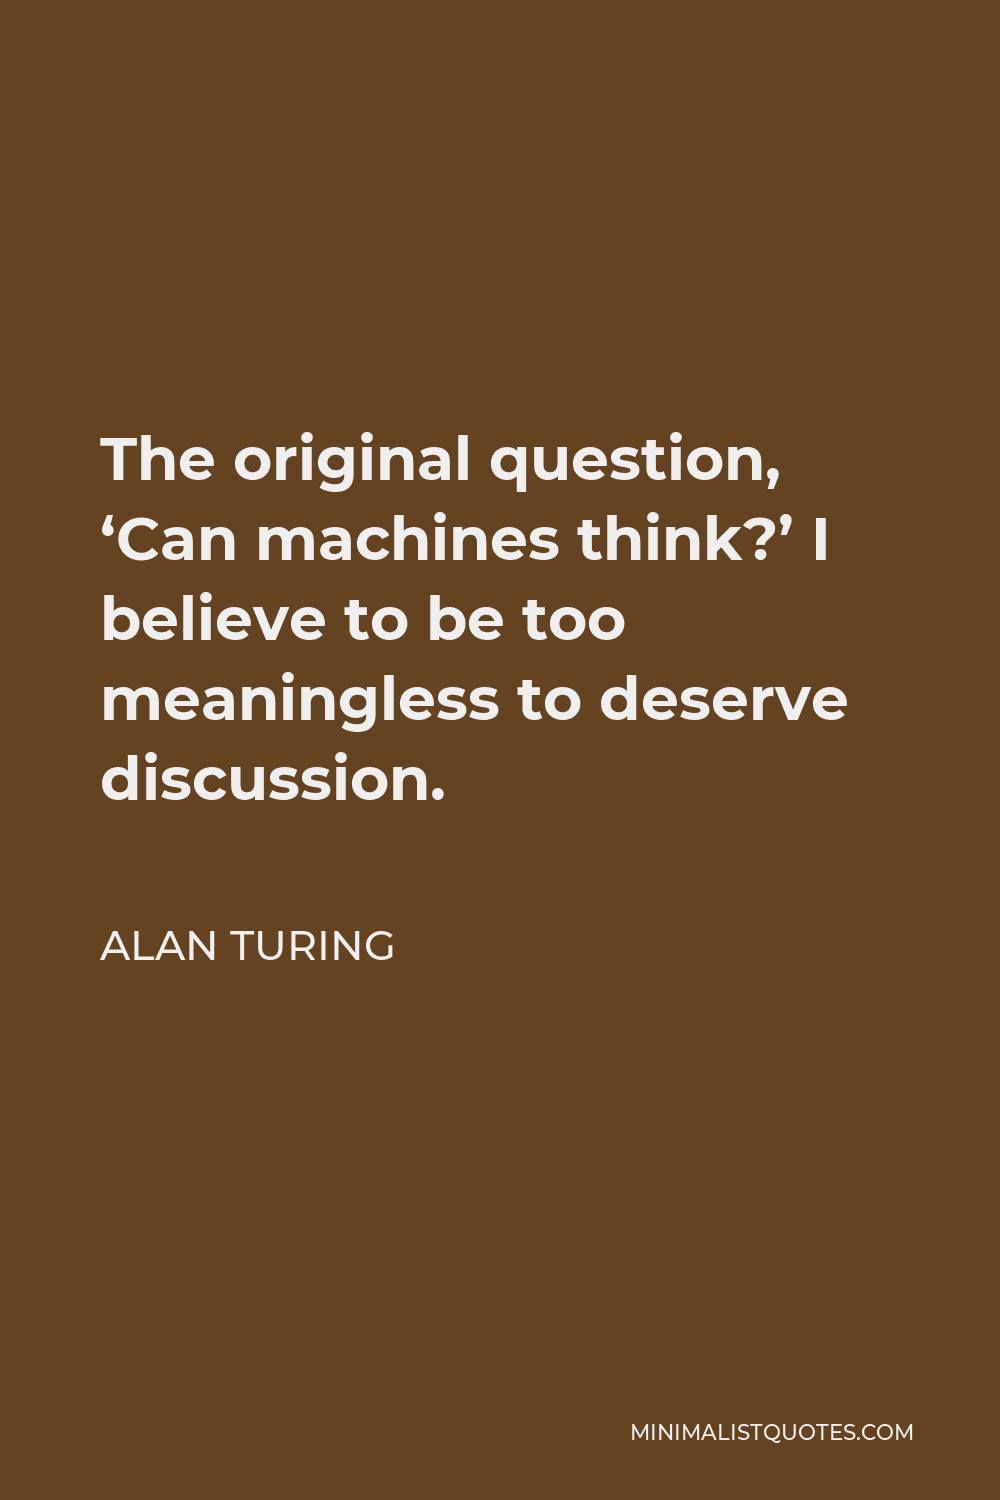 Alan Turing Quote - The original question, ‘Can machines think?’ I believe to be too meaningless to deserve discussion.